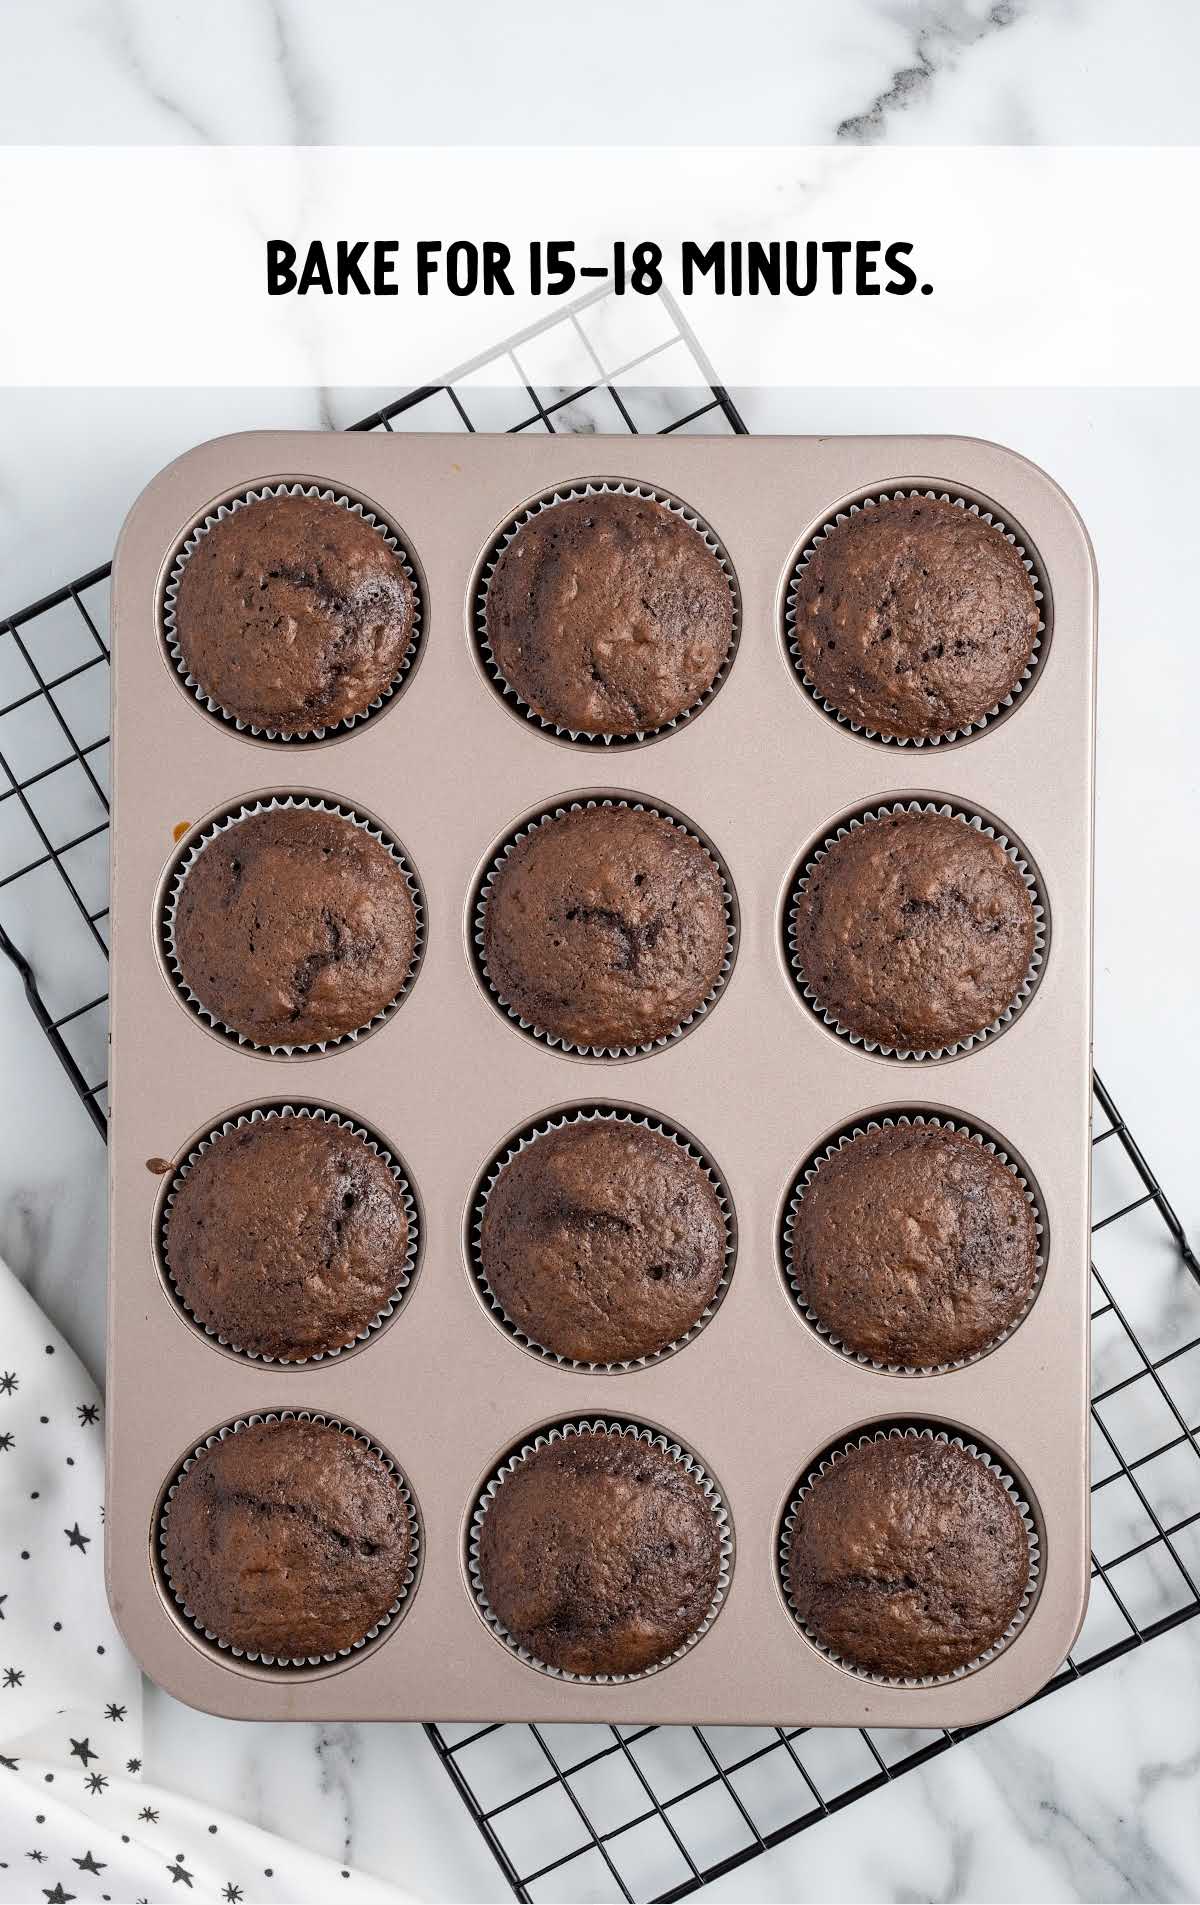 cupcakes baked for 15 to 18 minutes